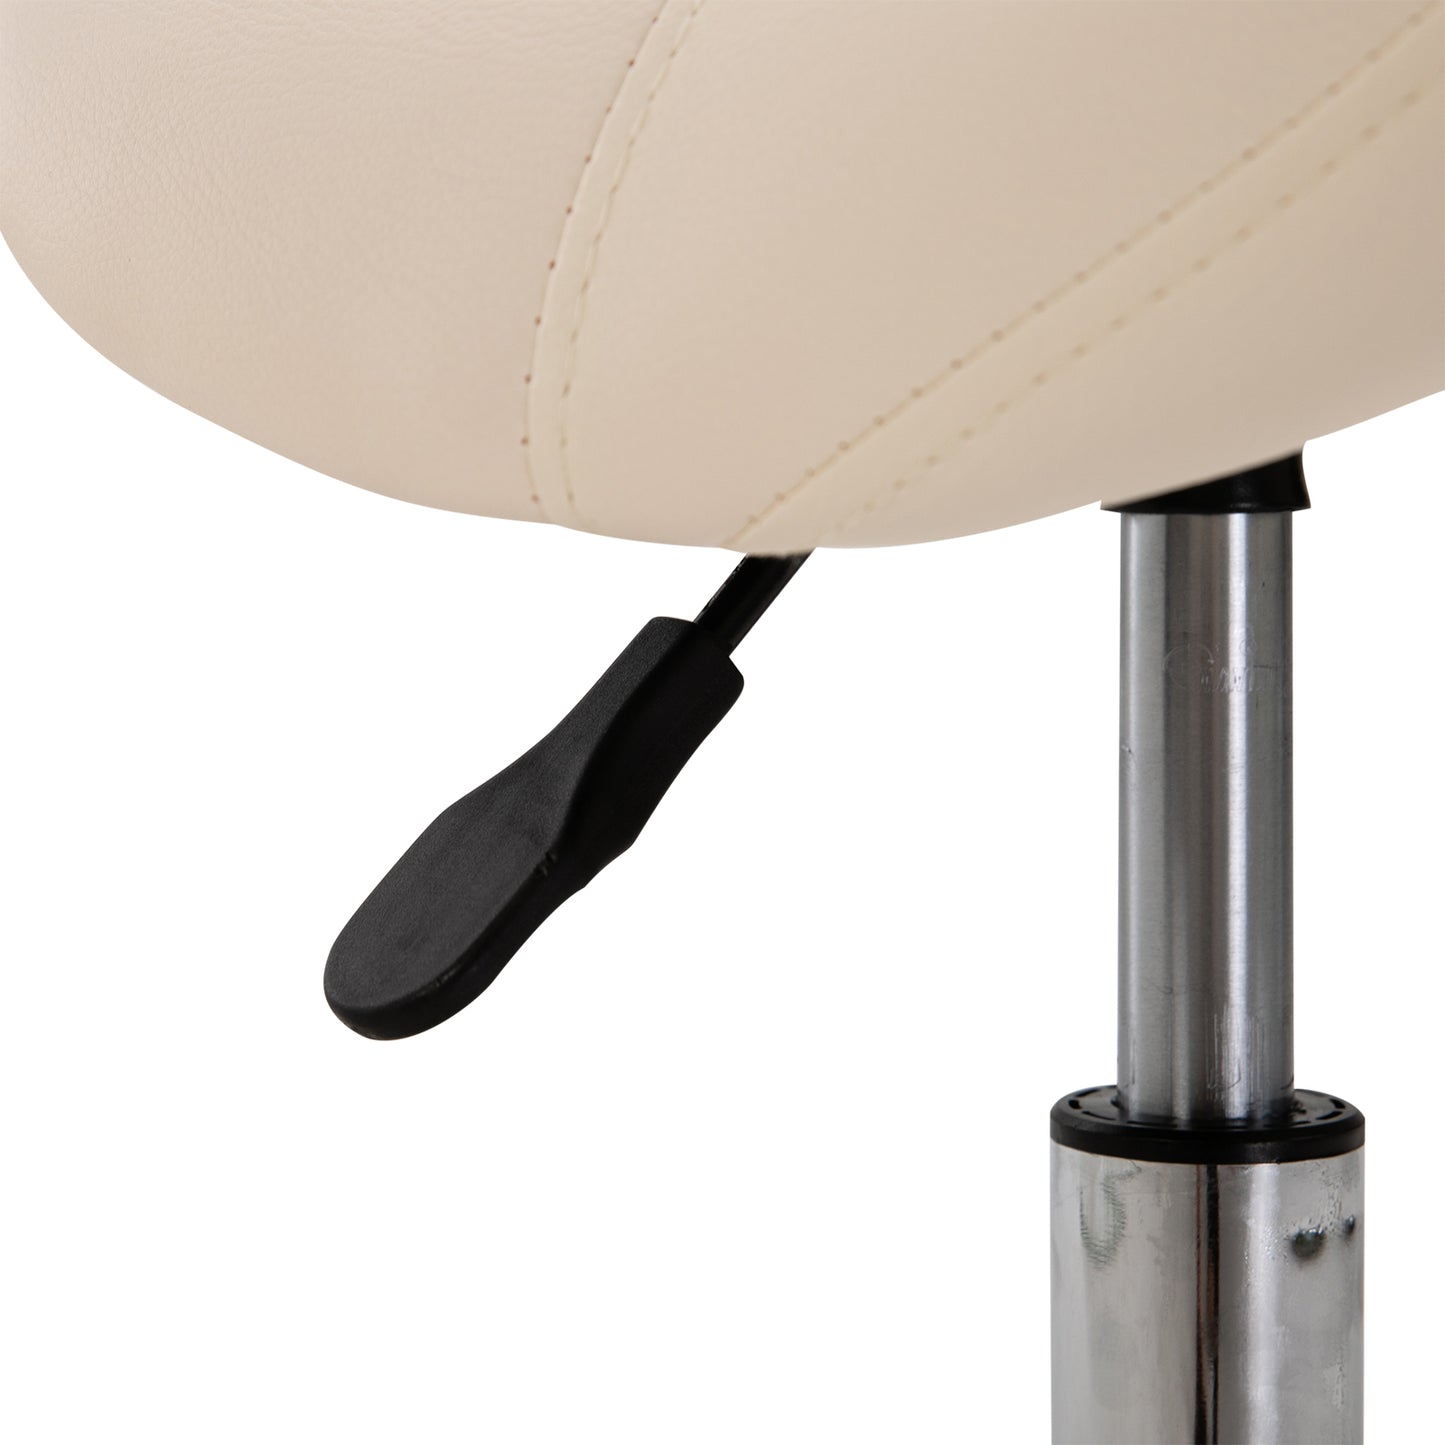 HOMCOM Faux Leather Height Adjustable Cosmetic Salon Chair Saddle Stool Beige